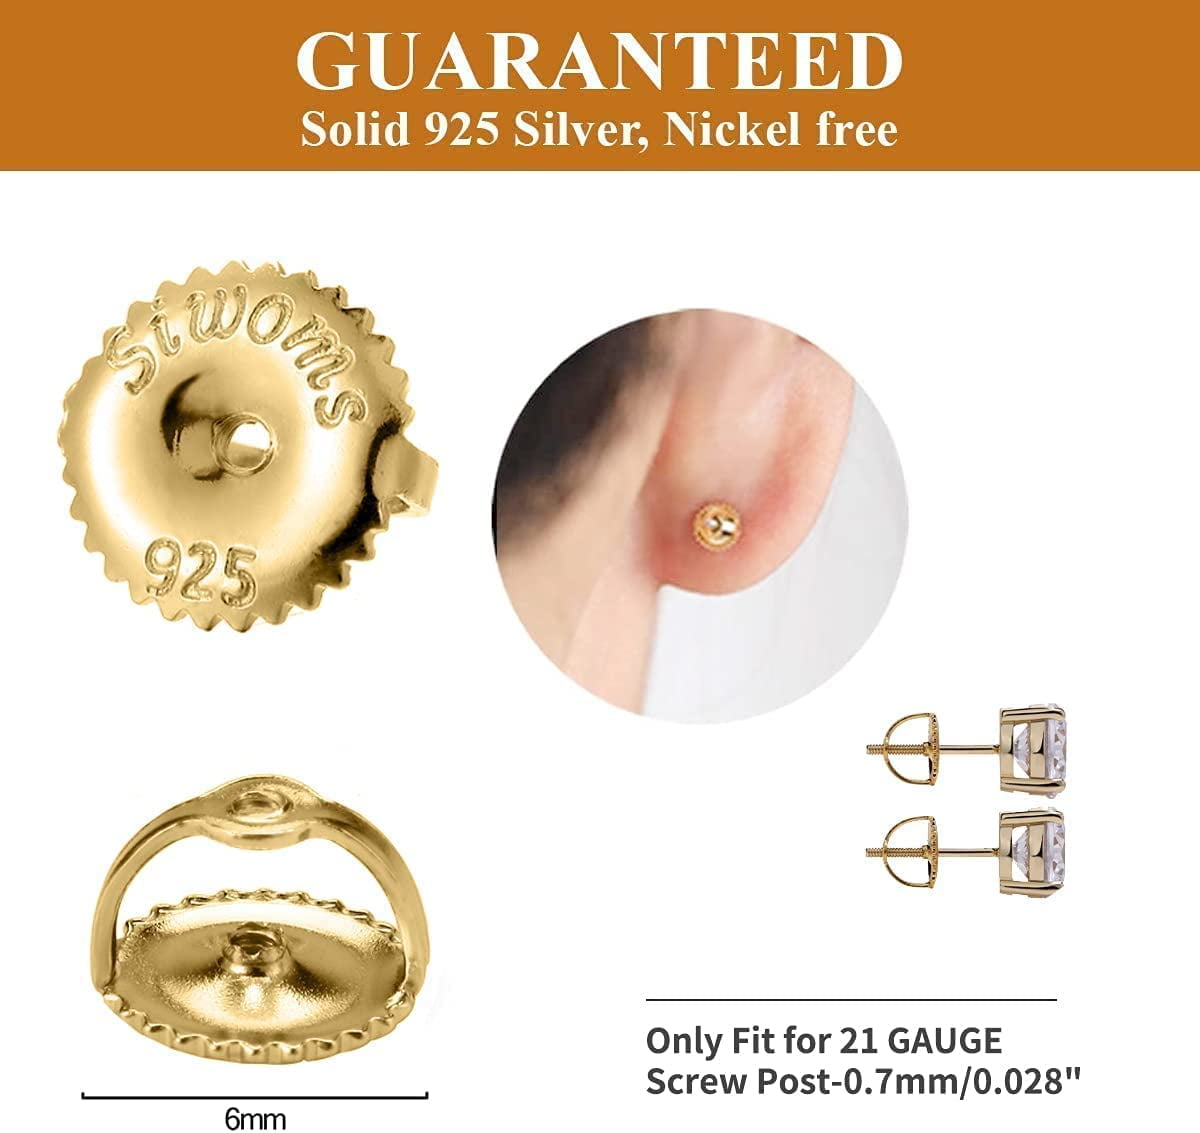 2 Qty. Genuine 14k Gold Earring Back, Very Tiny & for Thin Posts (4.0x2.5mm  Earnuts)